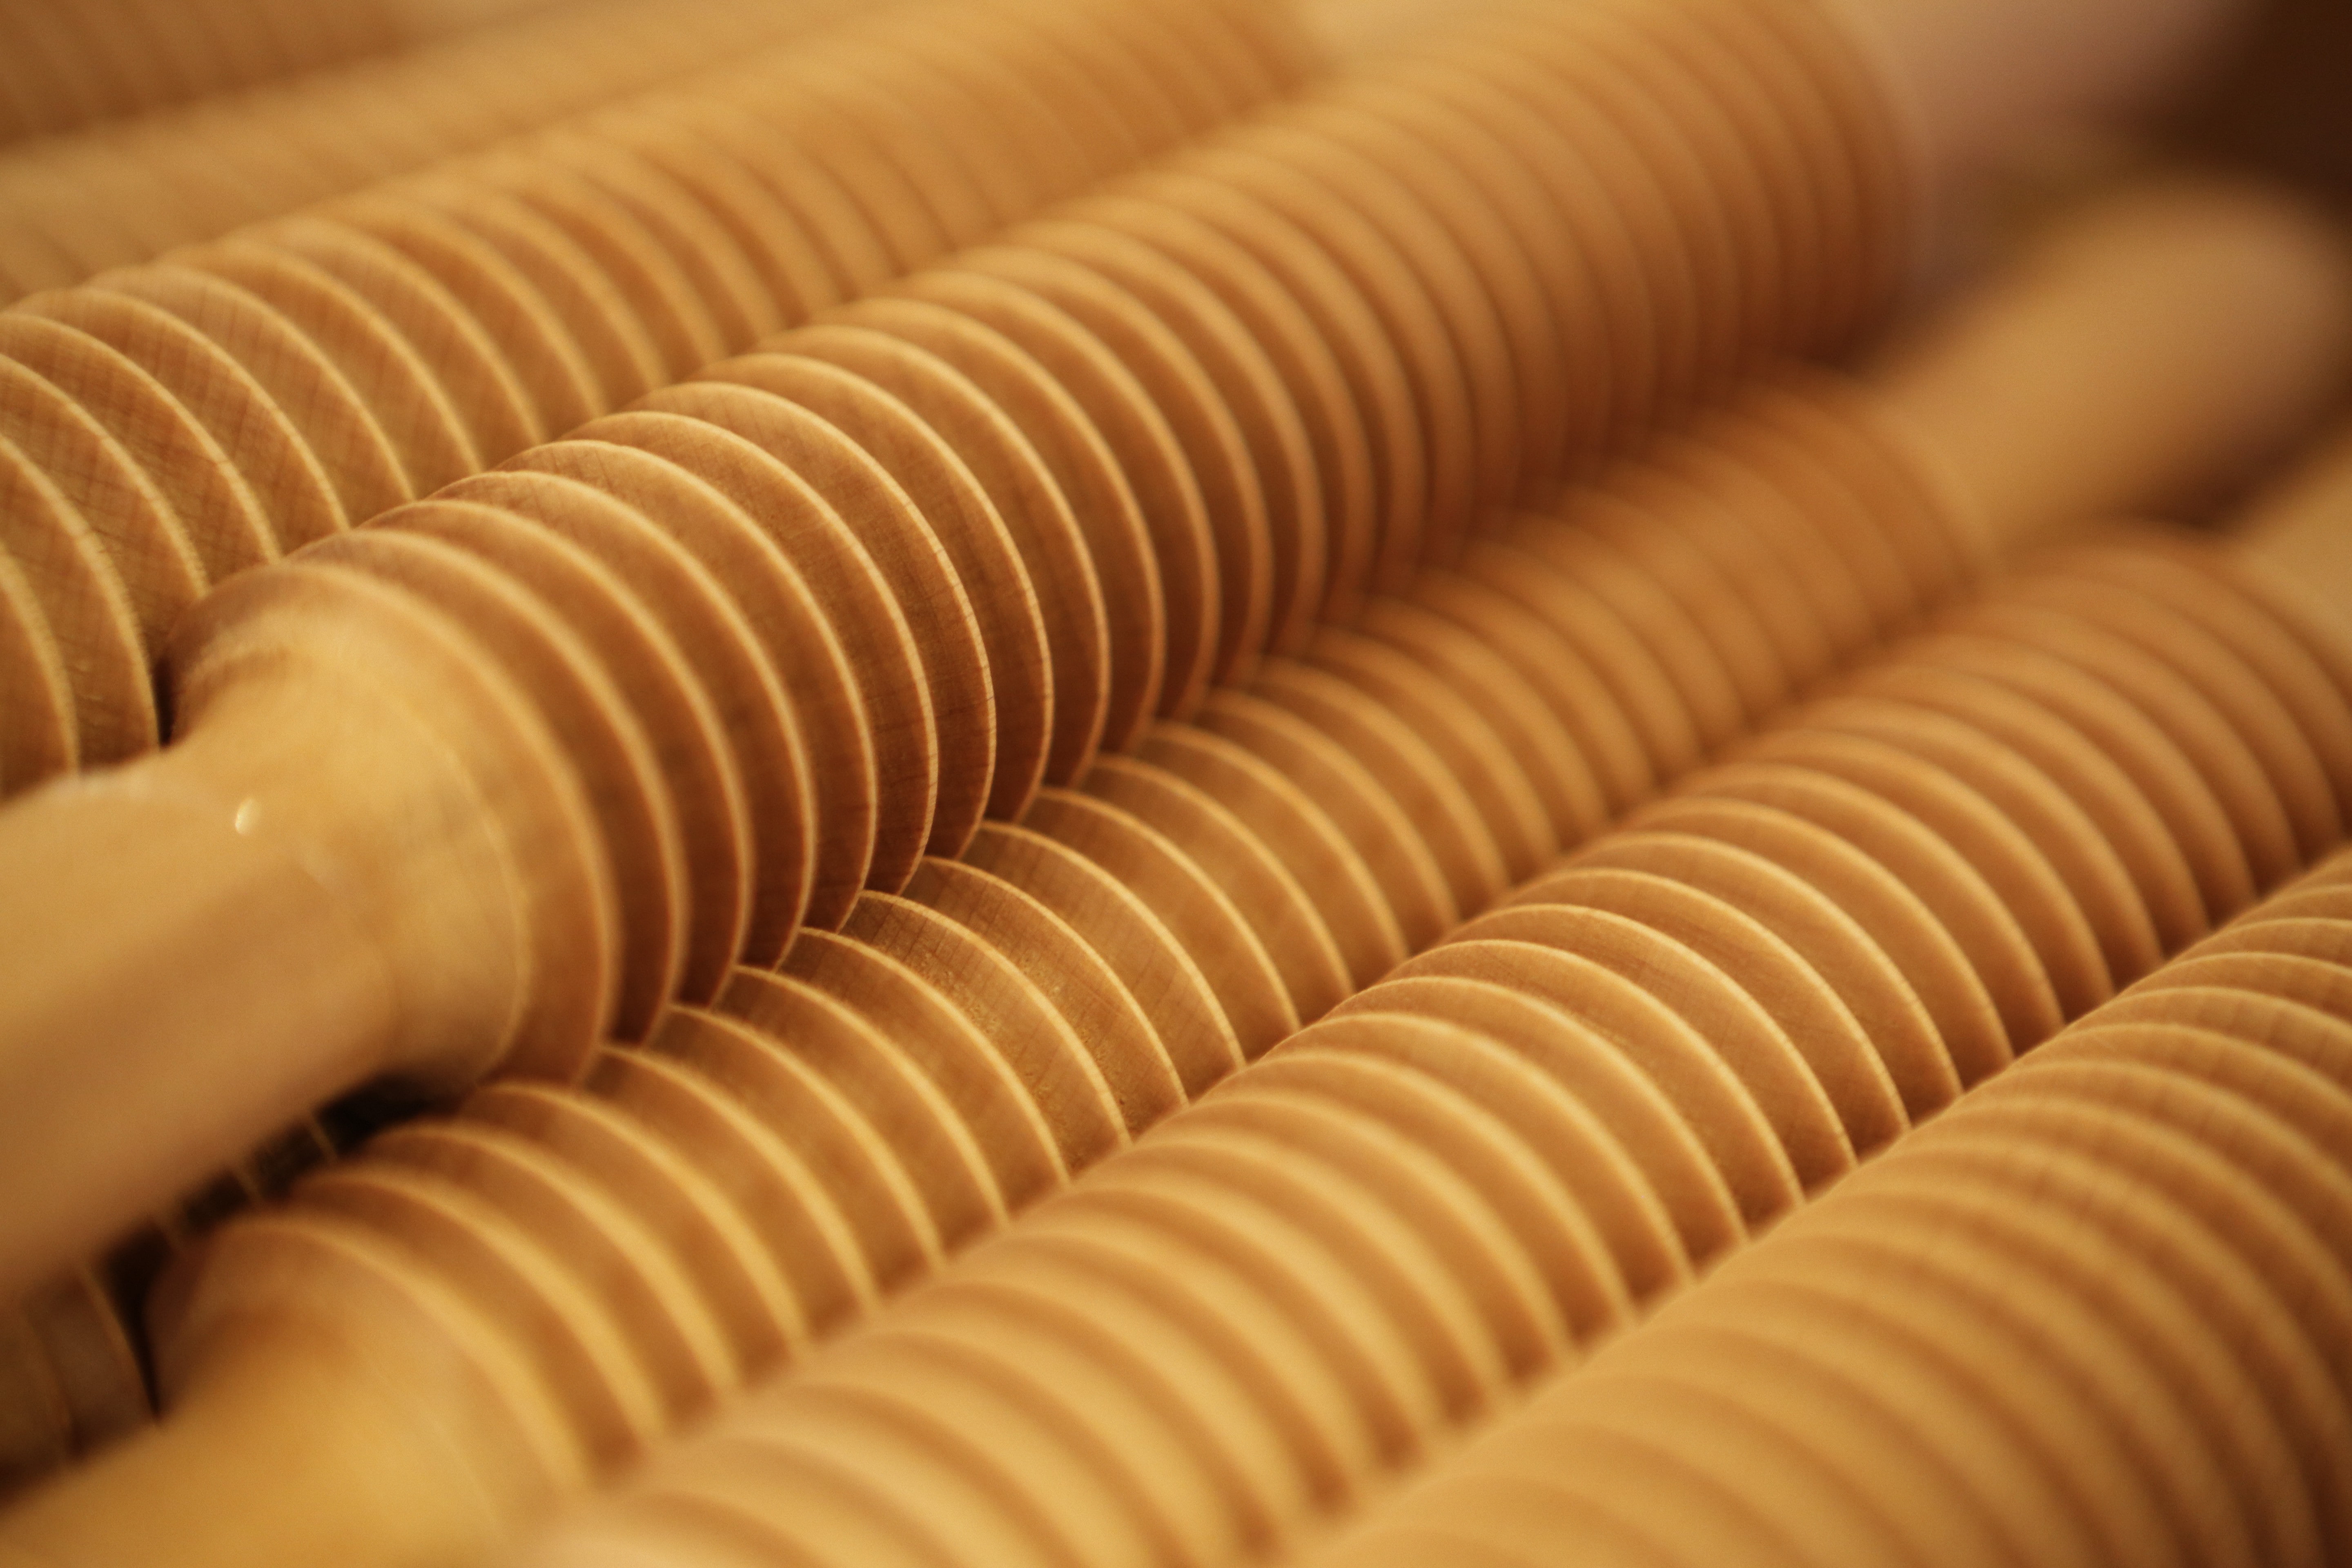 Abstract, Depth Of Field, Macro, brown wooden rolling pins